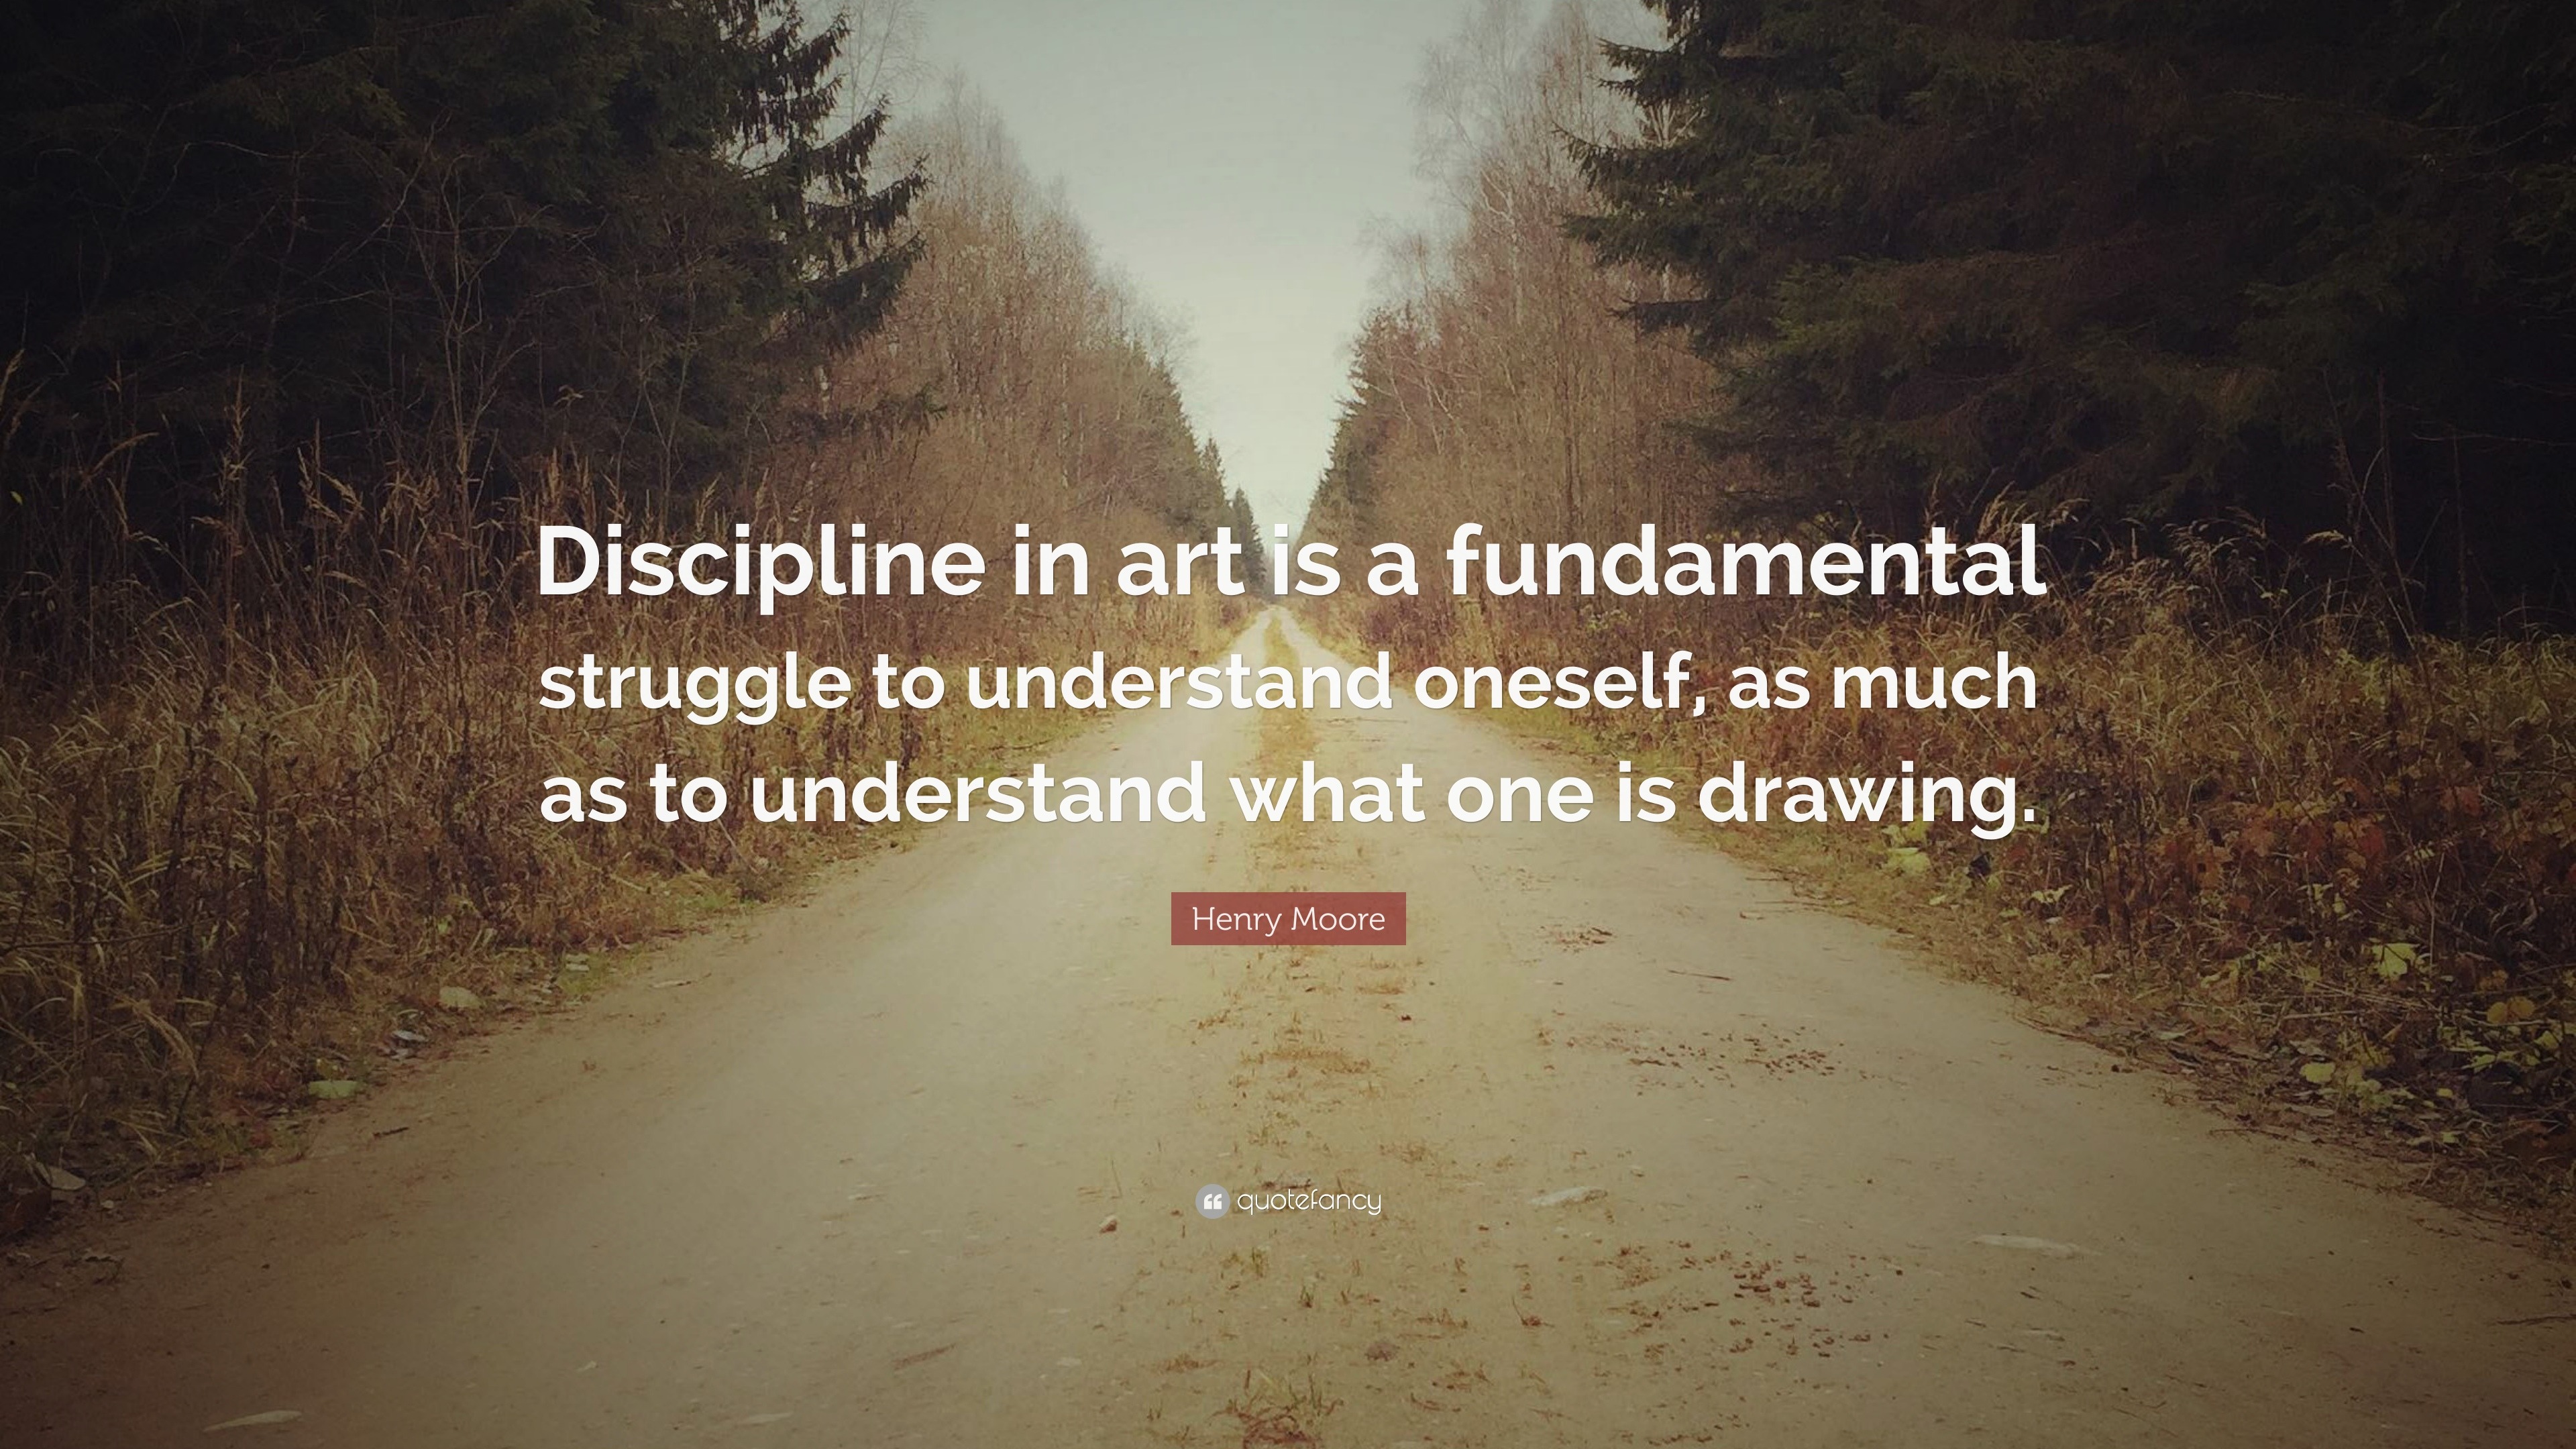 Henry Moore Quote “Discipline in art is a fundamental struggle to